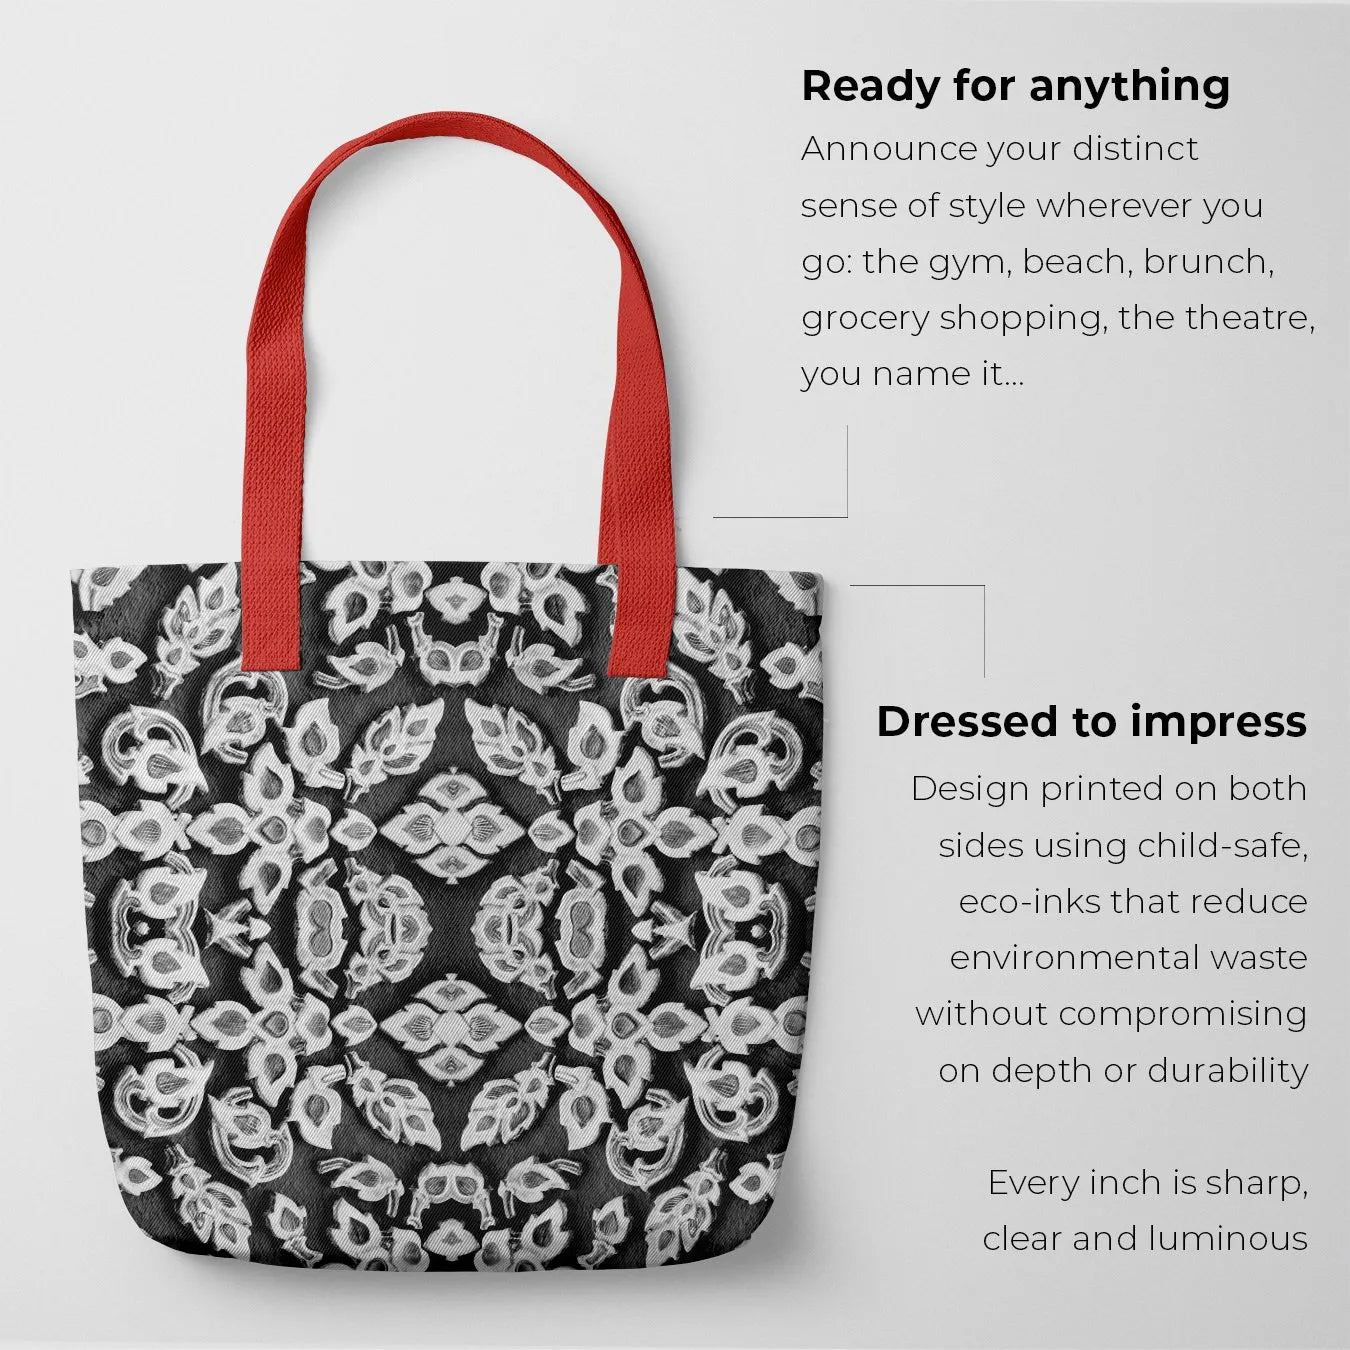 Ayodhya Tote - Black And White - Heavy Duty Reusable Grocery Bag - Shopping Totes - Aesthetic Art